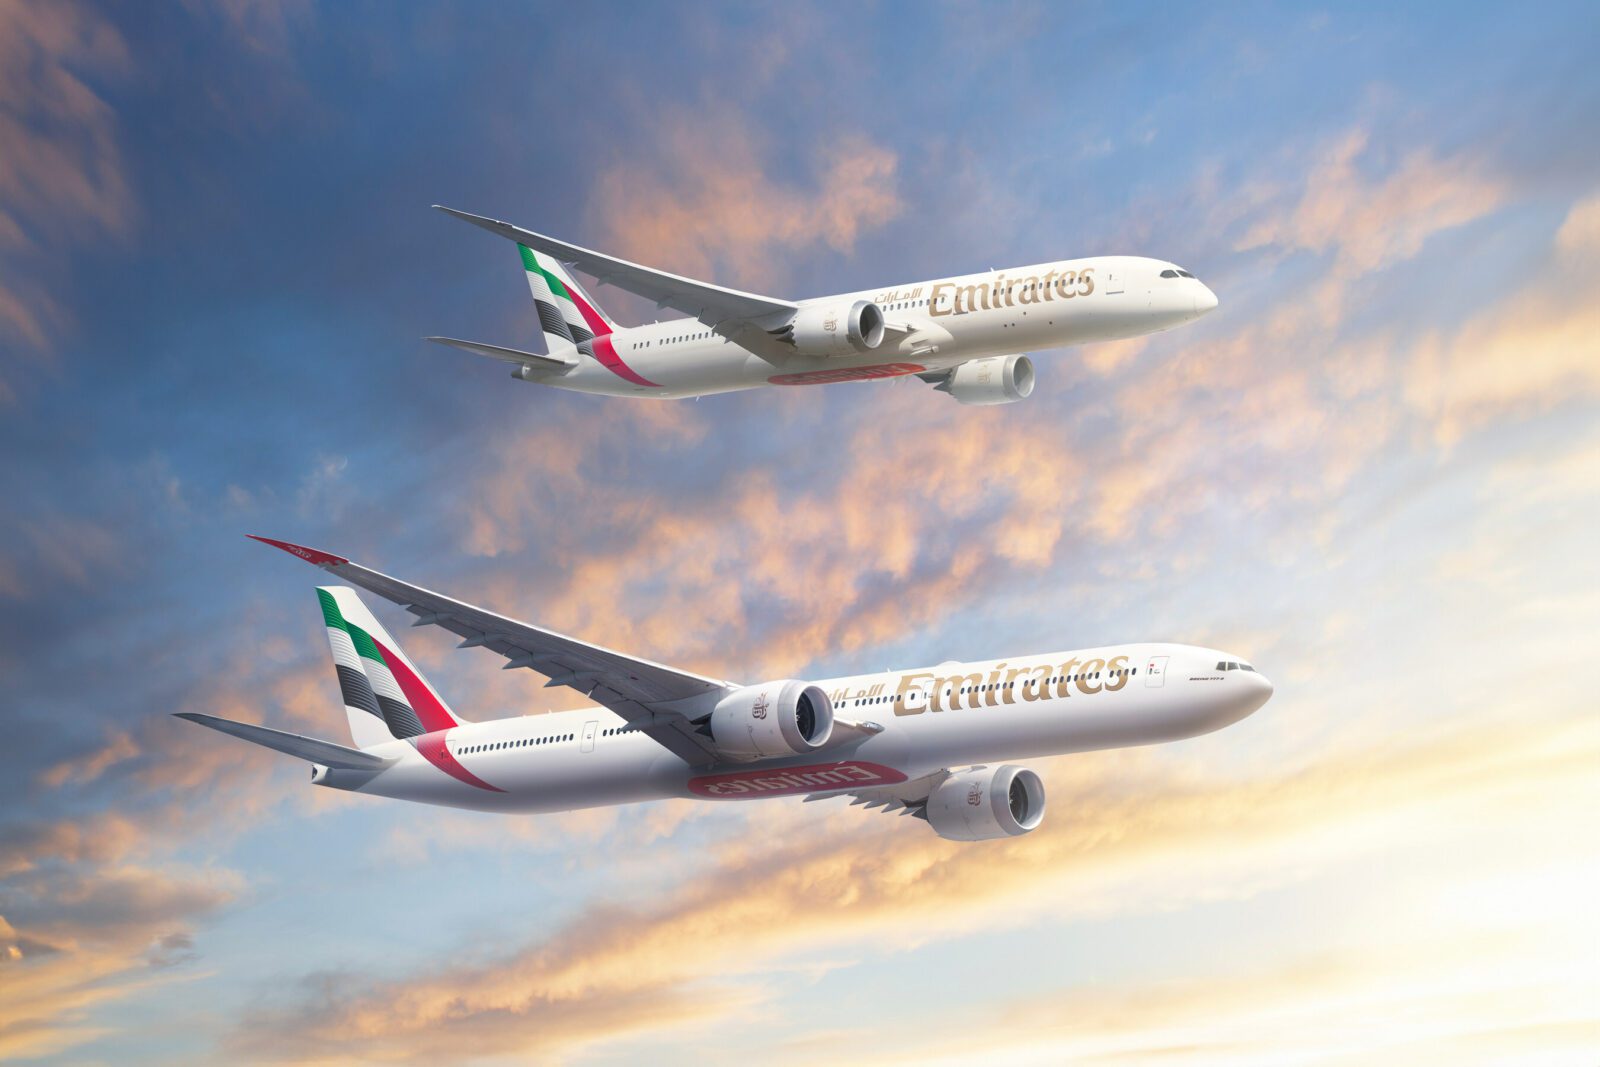 Emirates Orders Nearly 100 More Boeing Widebody Airplanes